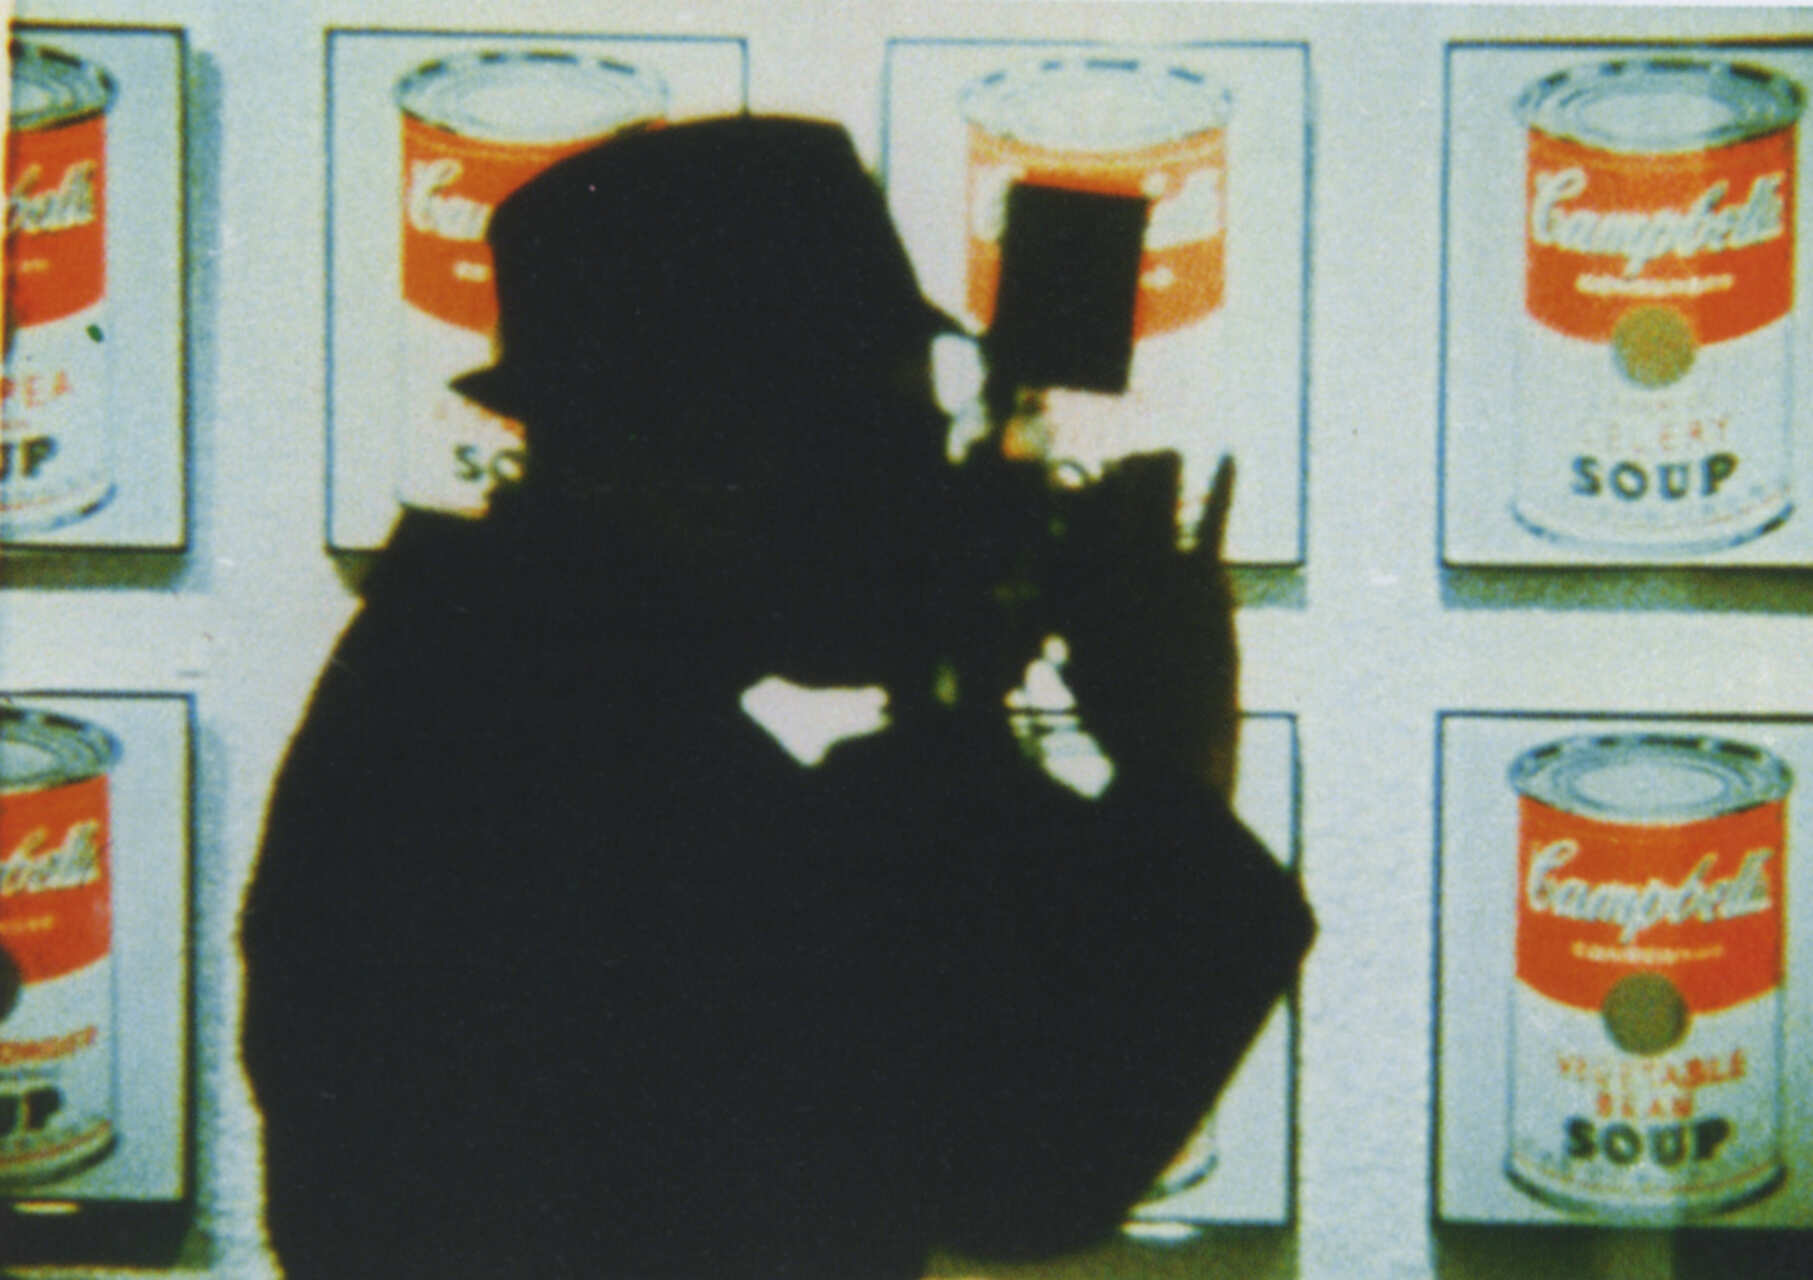 Still from the "Scenes from the life of Andy Warhol" (1965-1990) by Jonas Mekas.